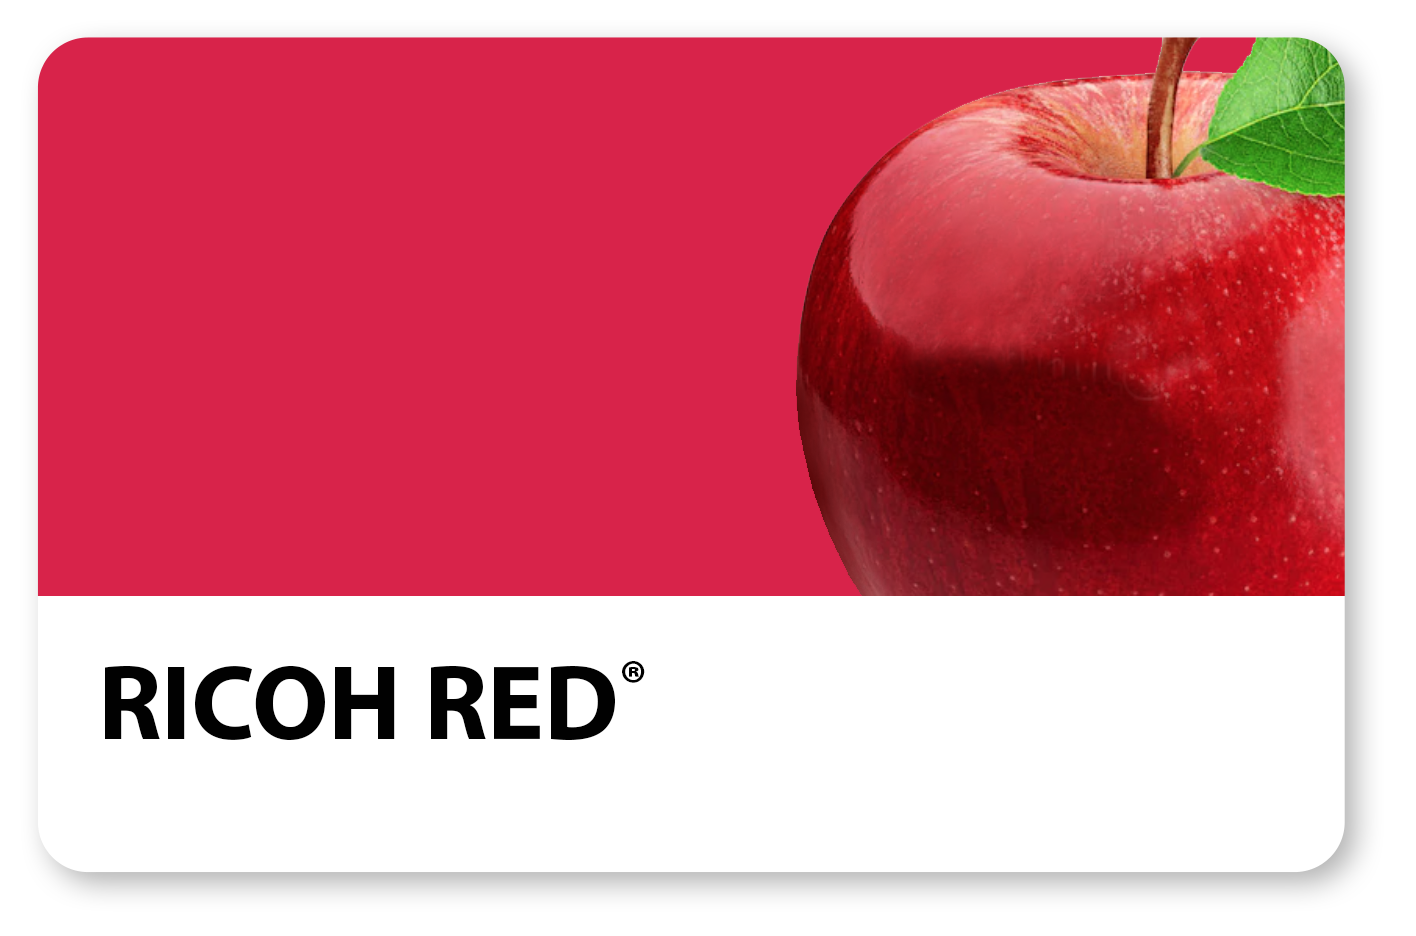 An apple with a red background with Ricoh Red text at the bottom